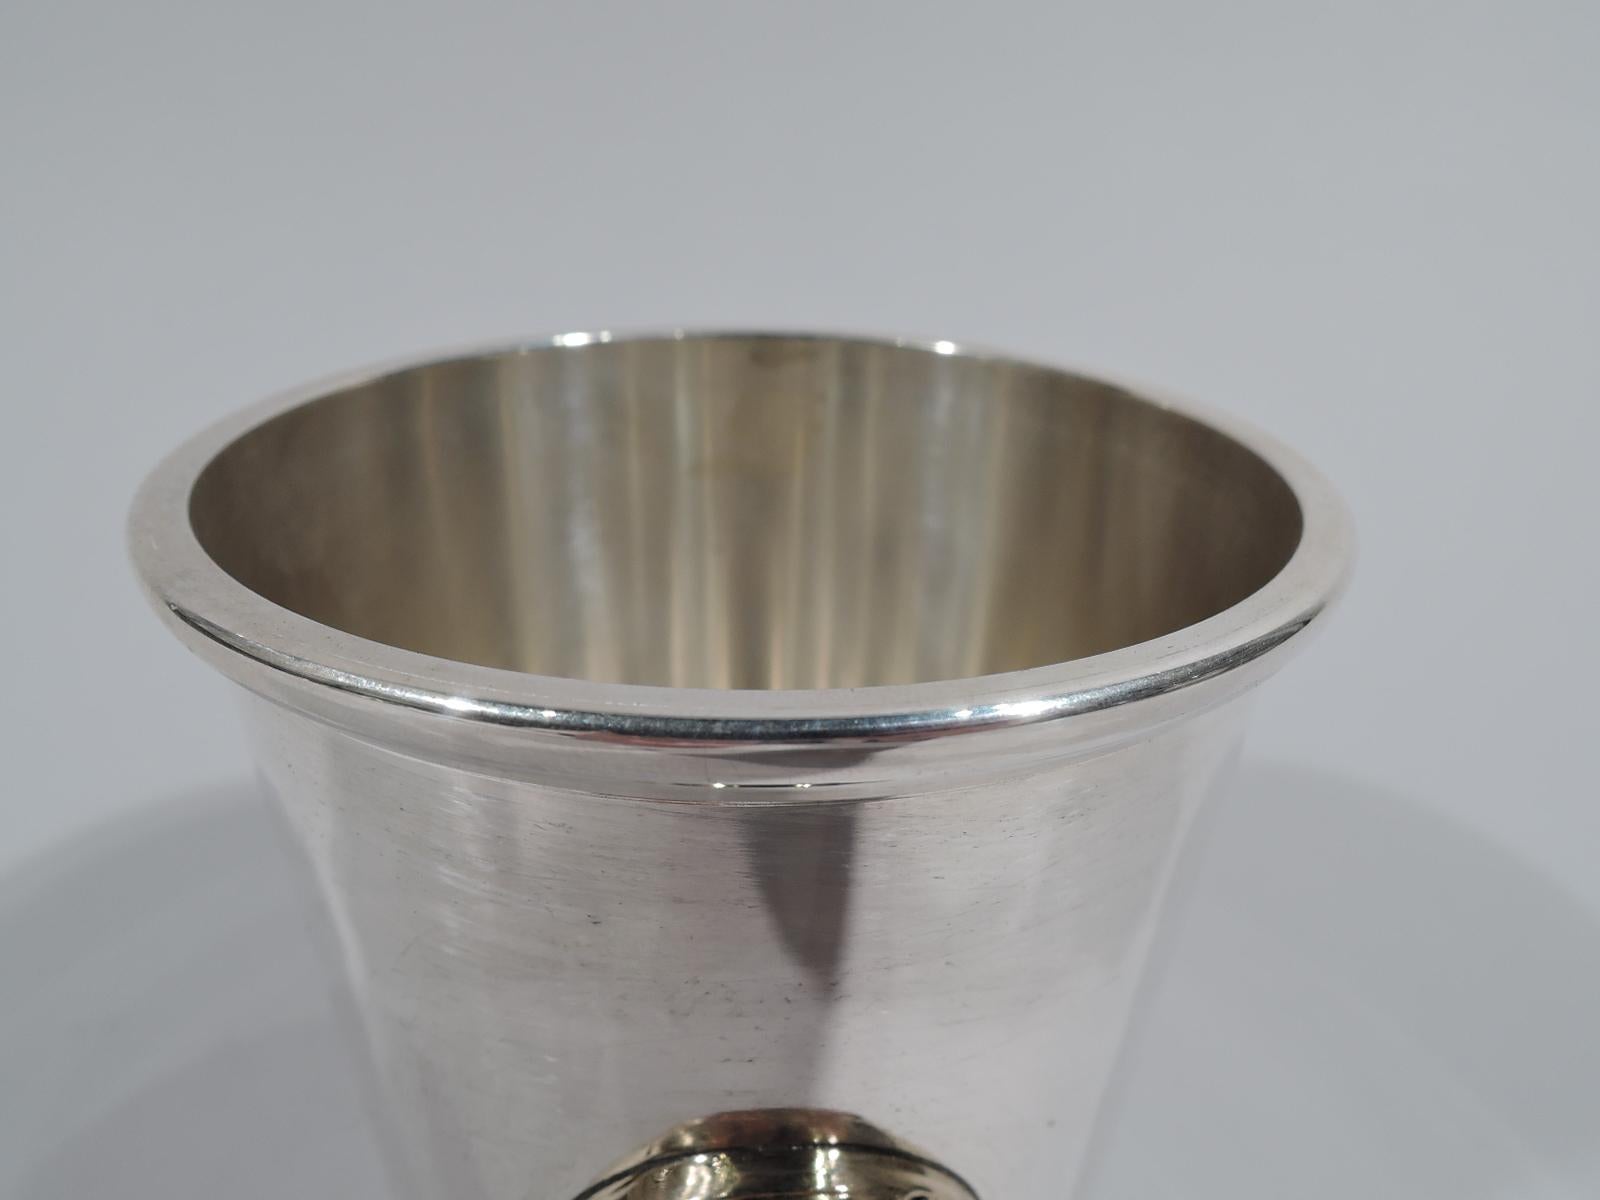 Official sterling silver mint julep cup for Kentucky Derby. Straight and tapering sides with tooled floral border at vase. Gilt horseshoe applied to front. Marked: Official / Kentucky Derby / Mint Julep Cup / Sterling / BWK. Weight: 5.5 troy ounces.